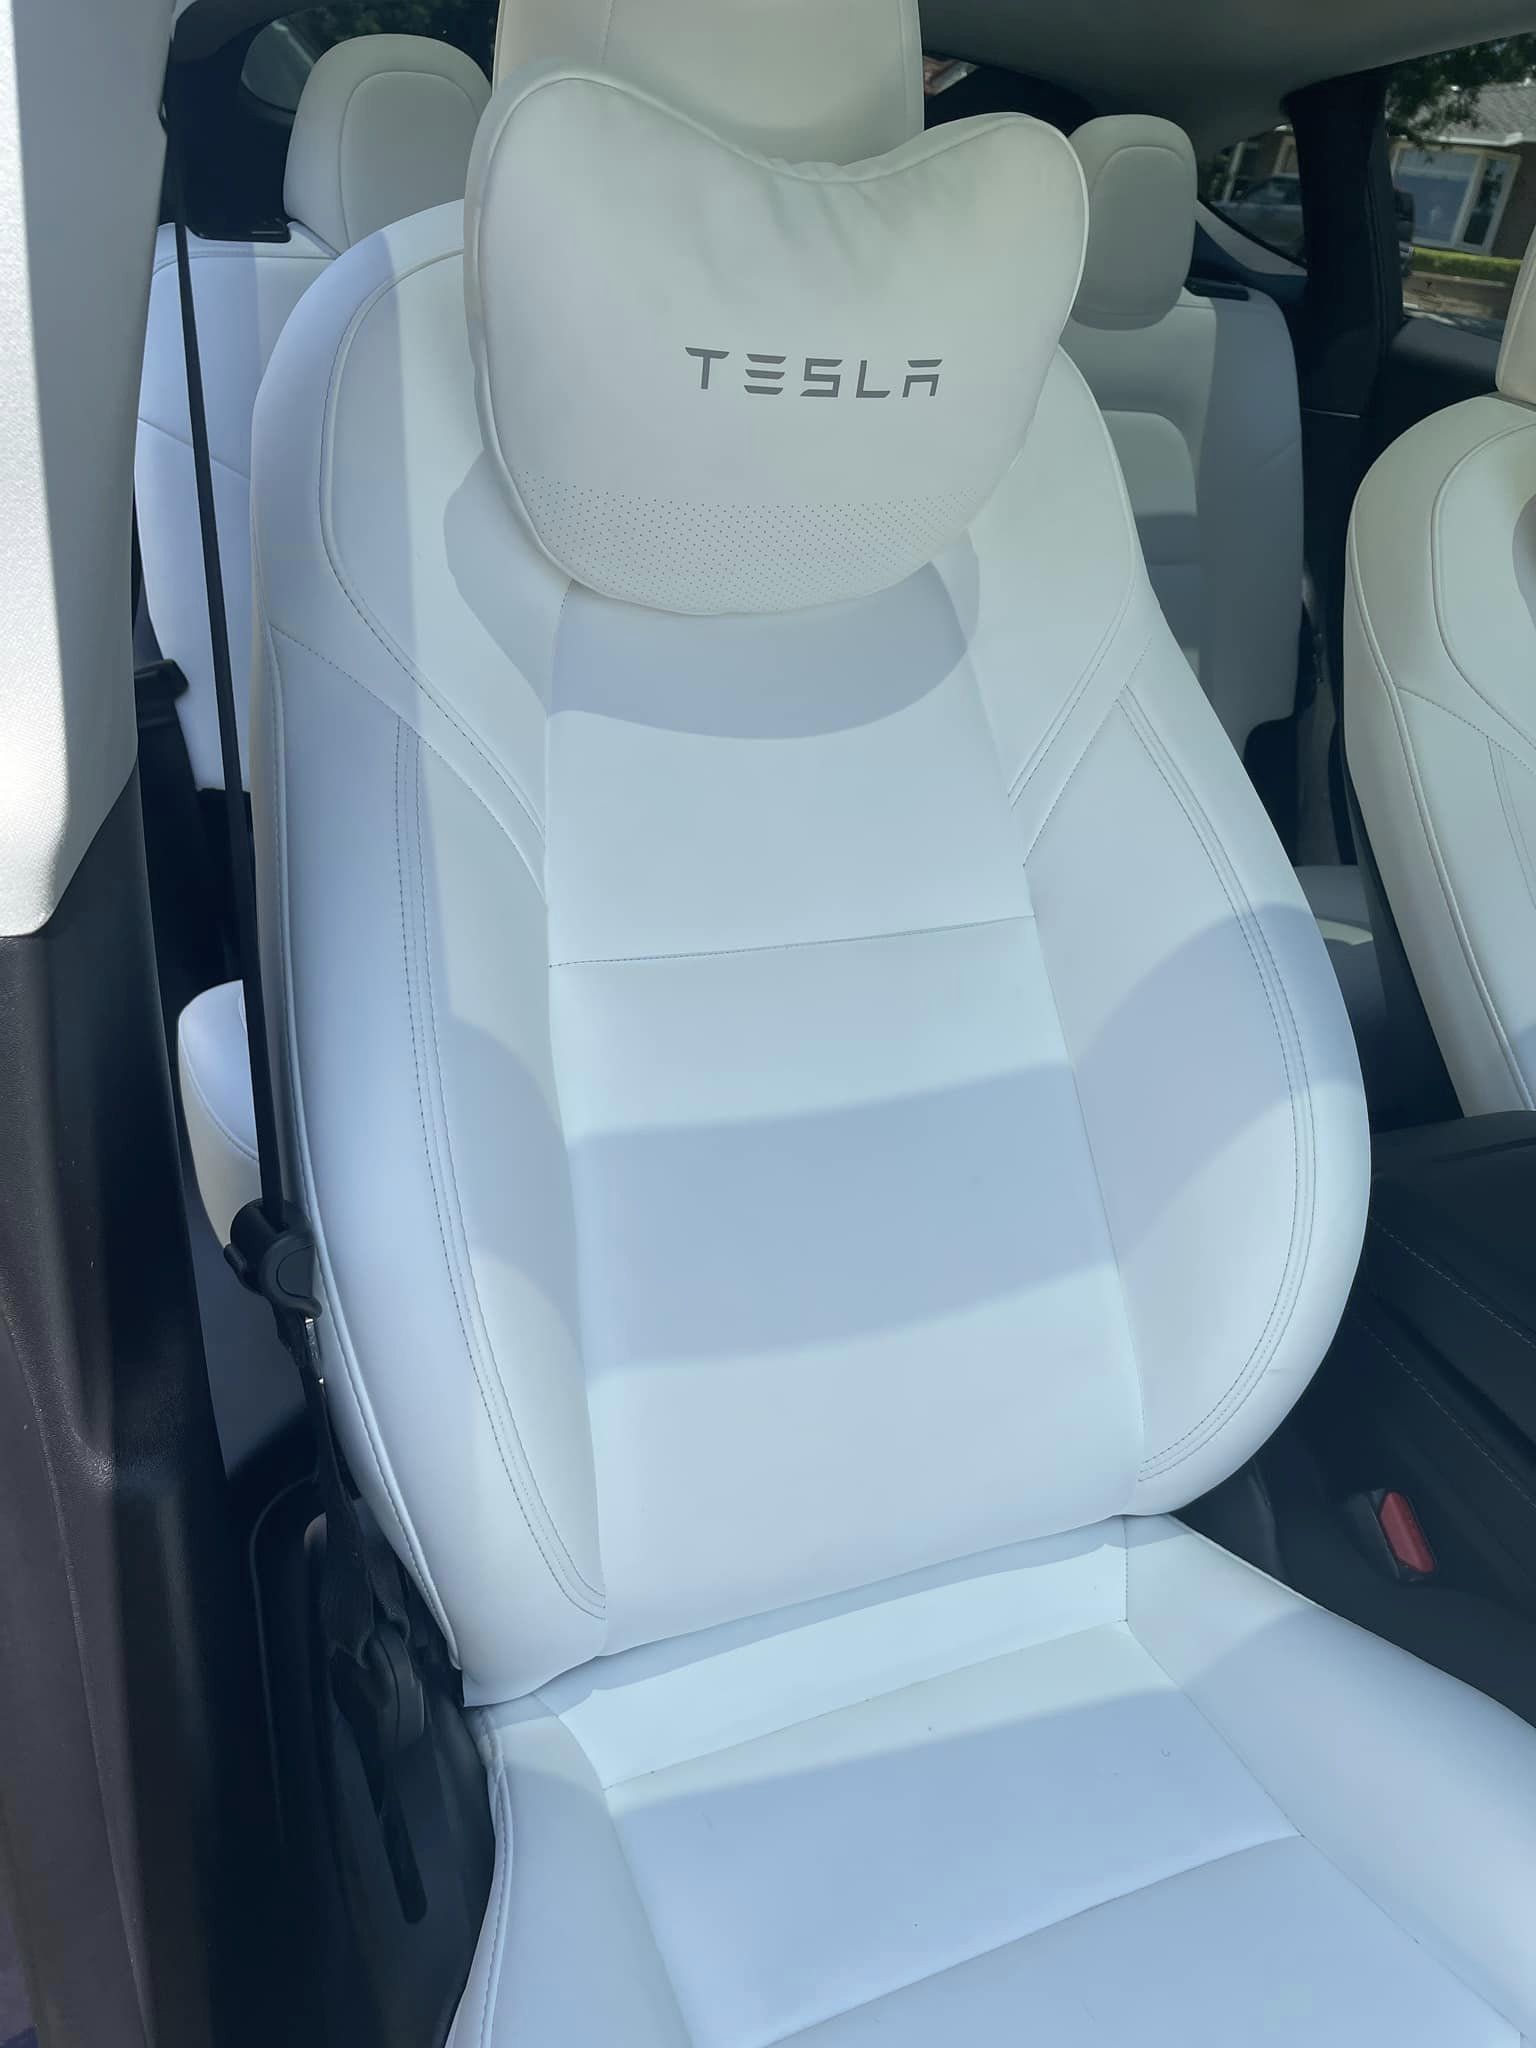 TesLiner Tesla Seat Cleaner for White, Black, Cream Vegan Leather, Helps  with Blue Dye, Stains, Safe on All Surfaces, Interior Cleaner for Model 3 Y  S X